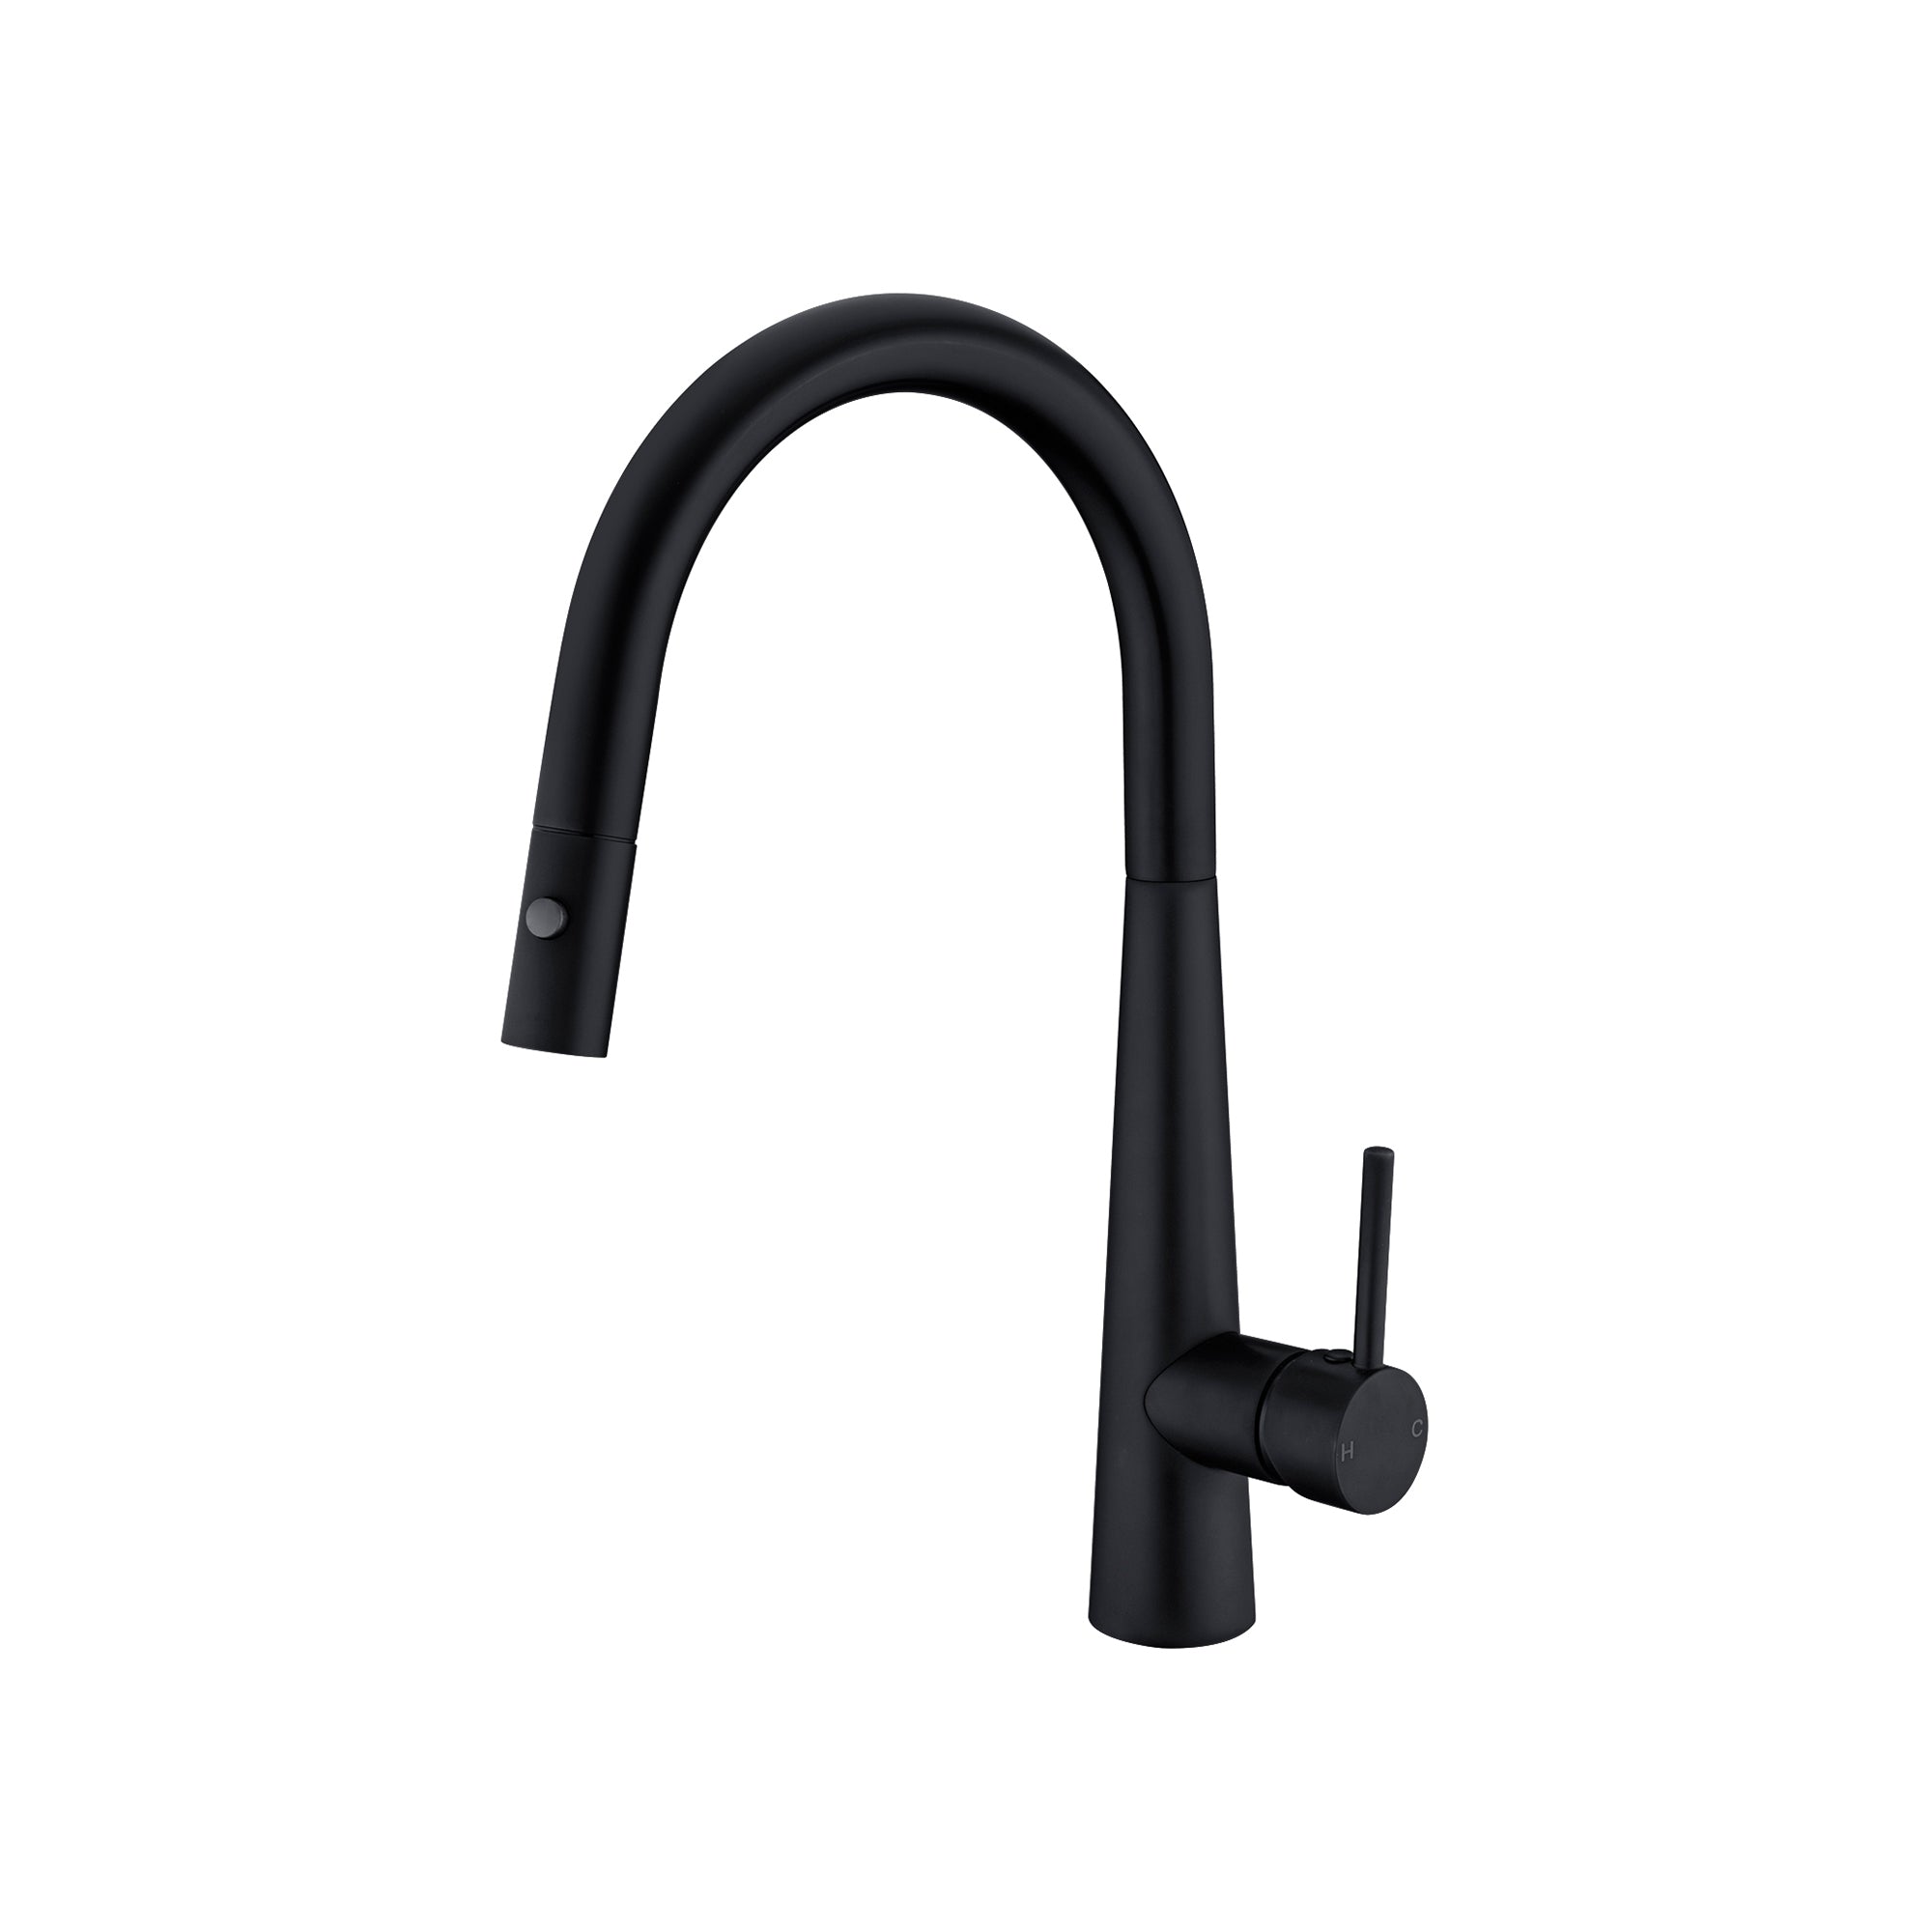 Nero Dolce Gooseneck Pullout Sink Mixer with Vegie Spray NR581009c